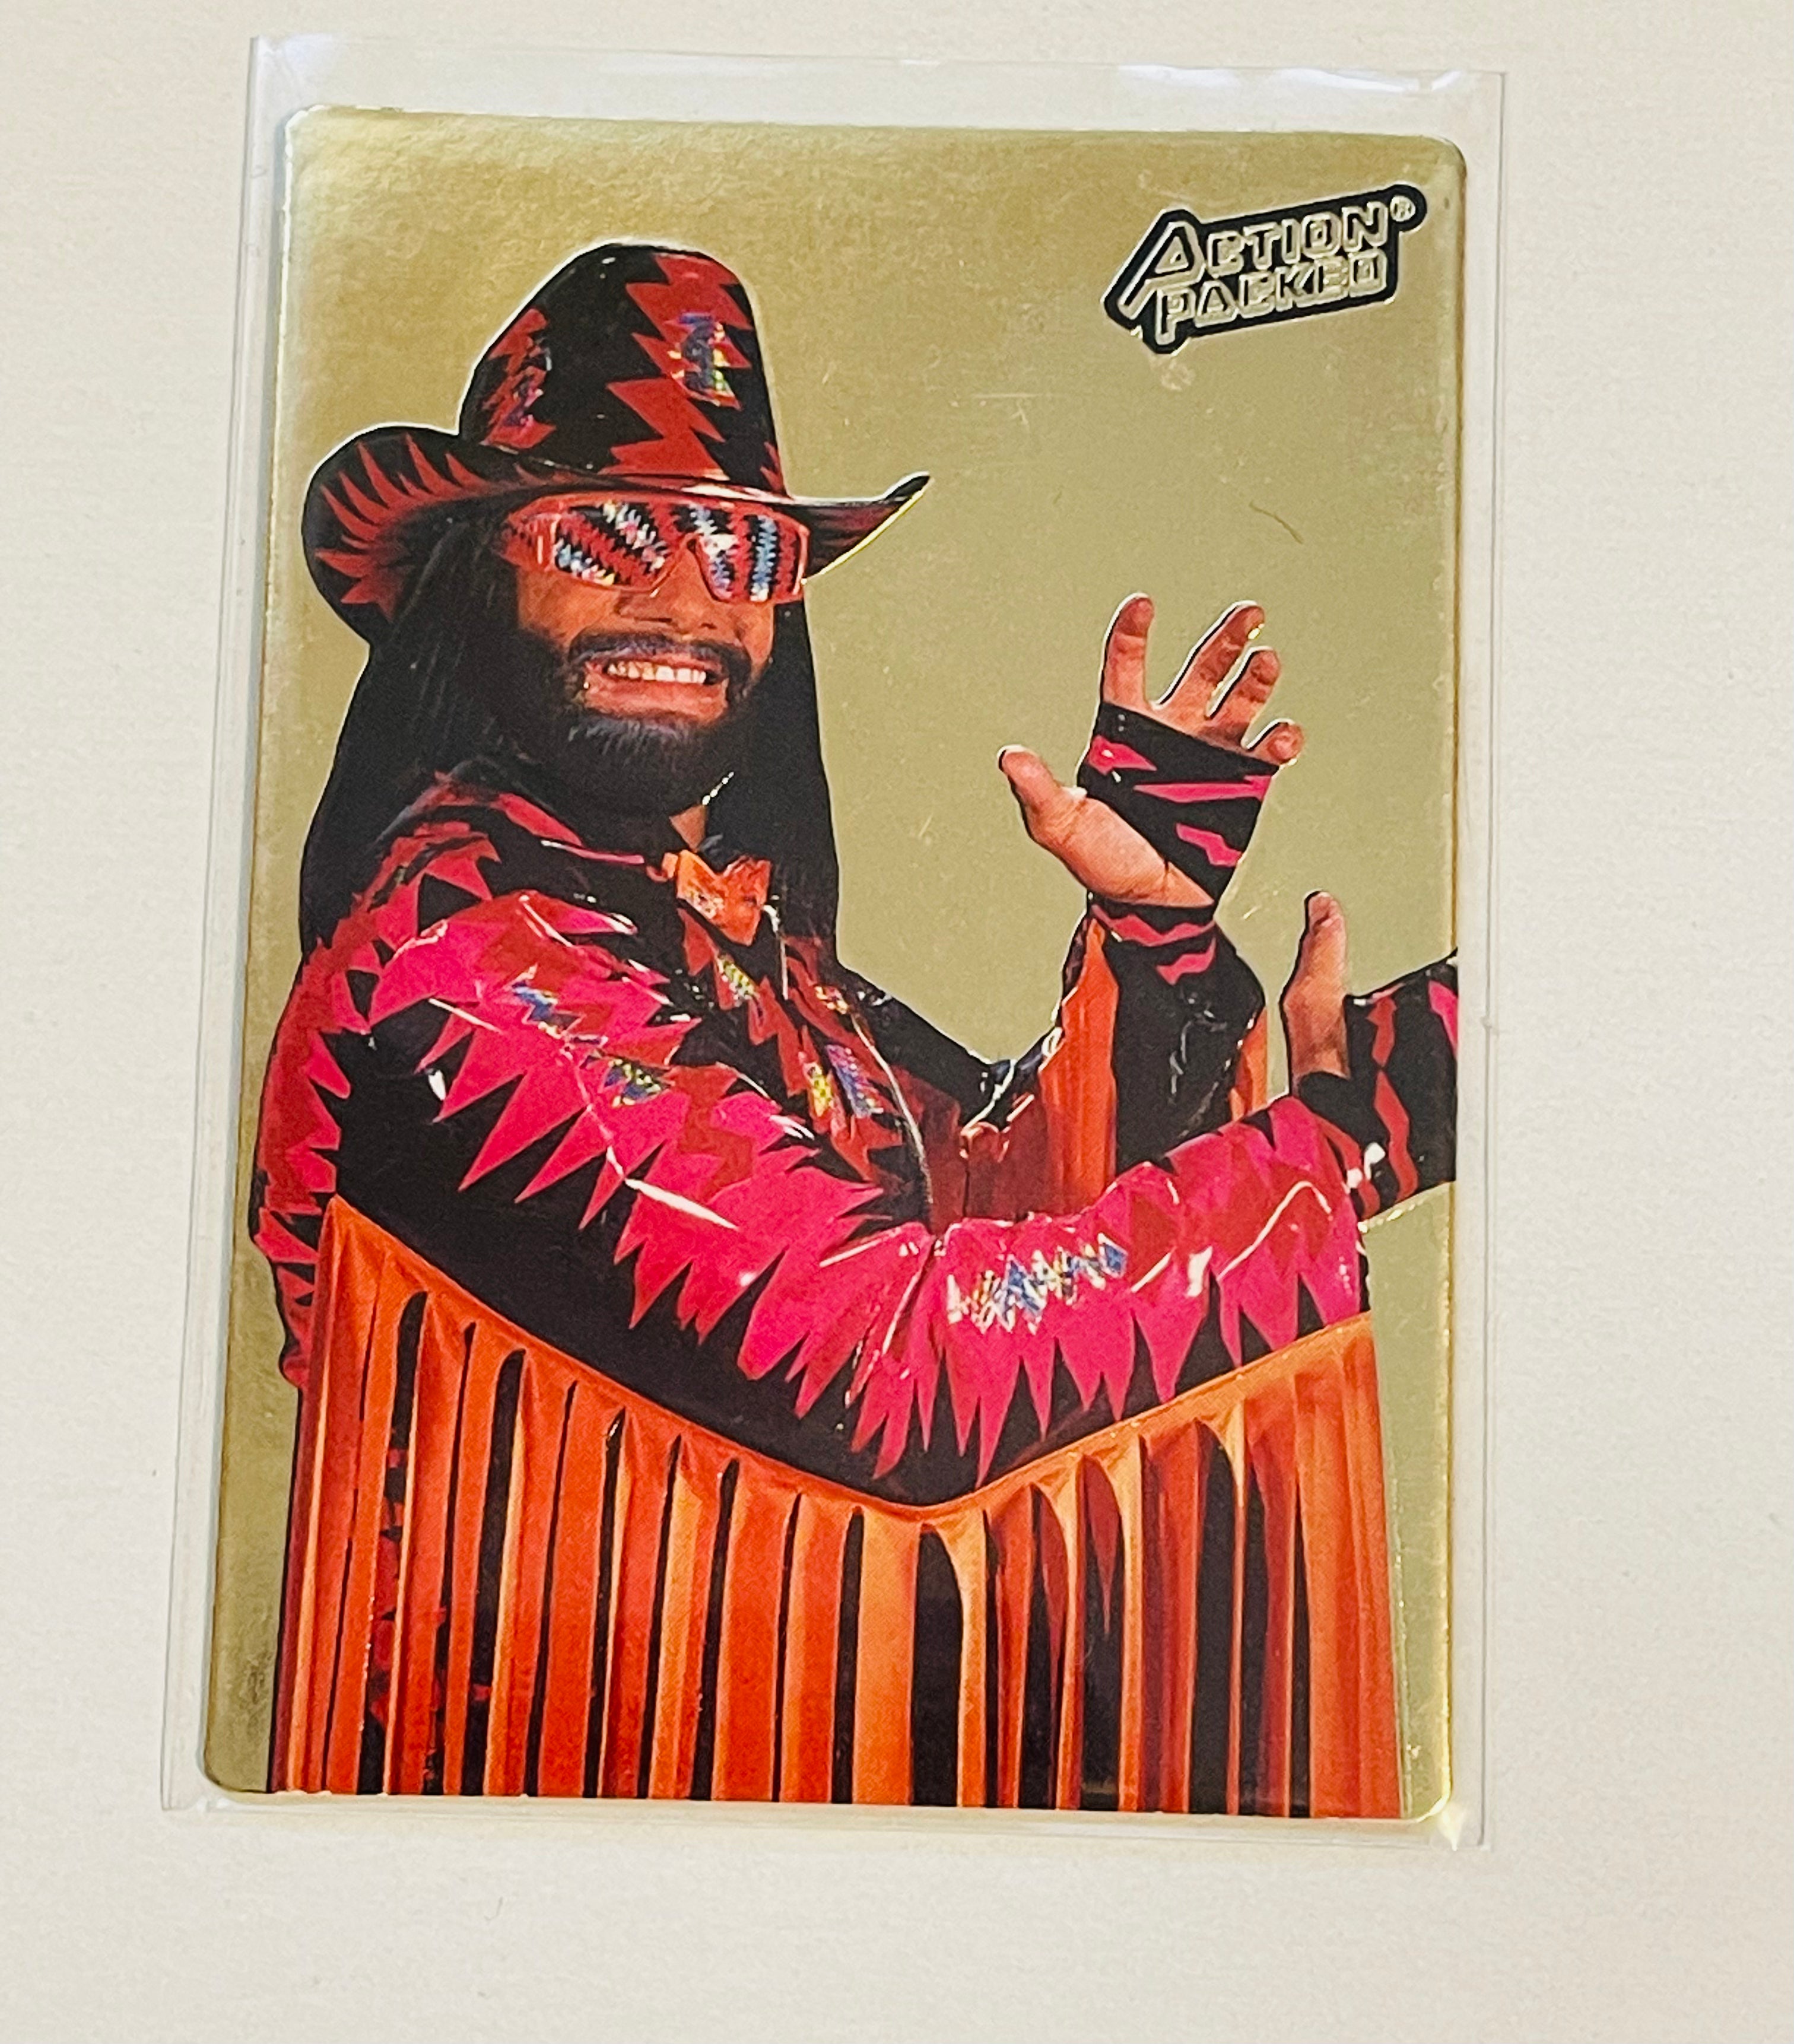 WWF Wrestling Action Packed Macho Man promo card 1994